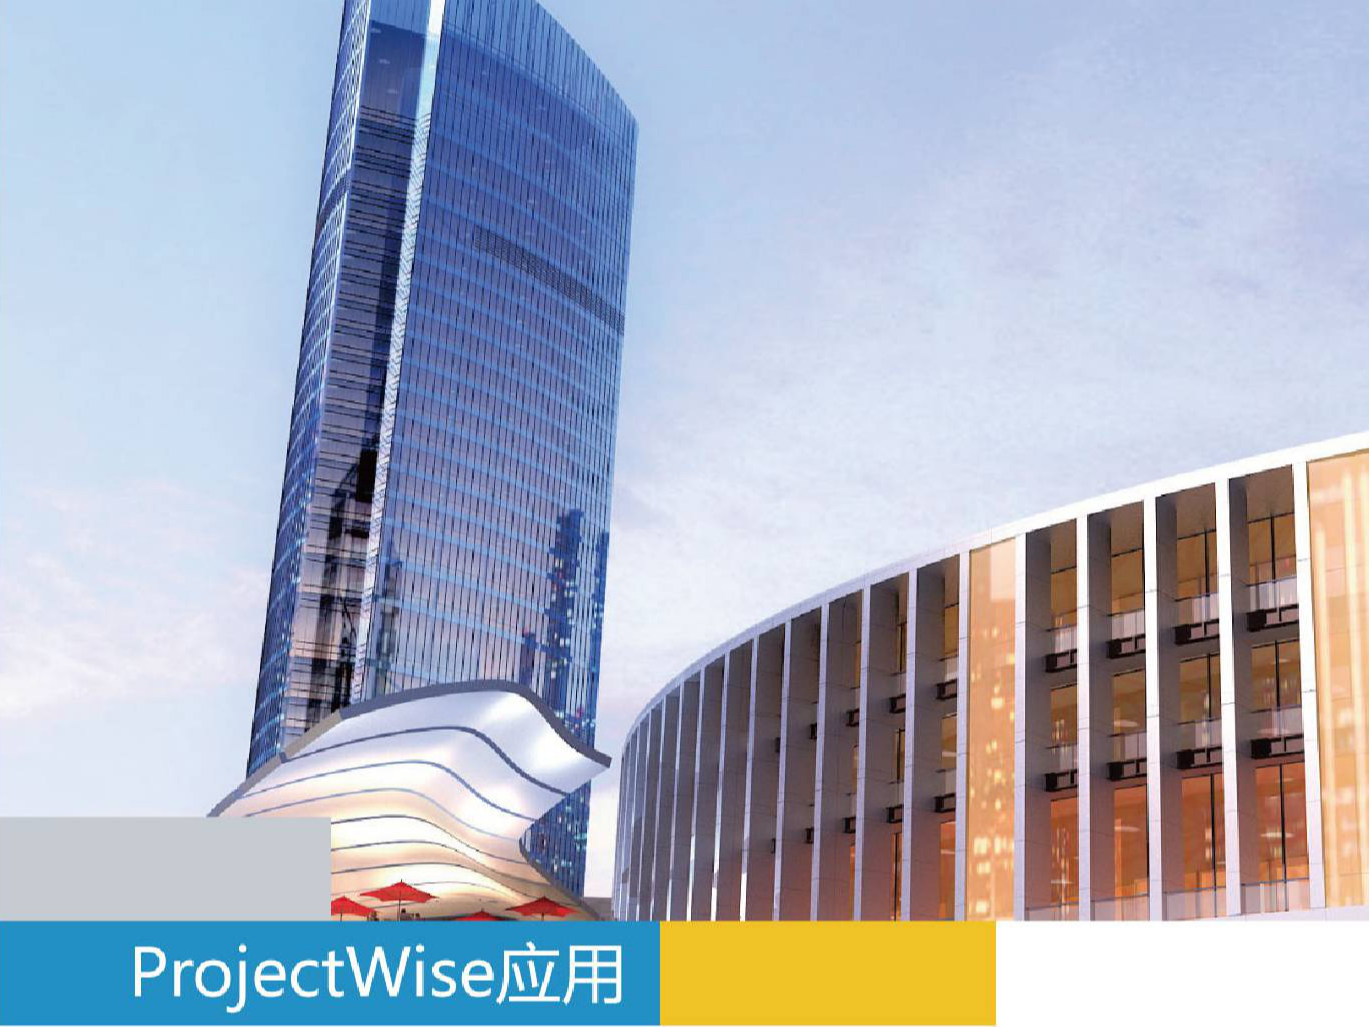 ProjectWise 协同管理平台